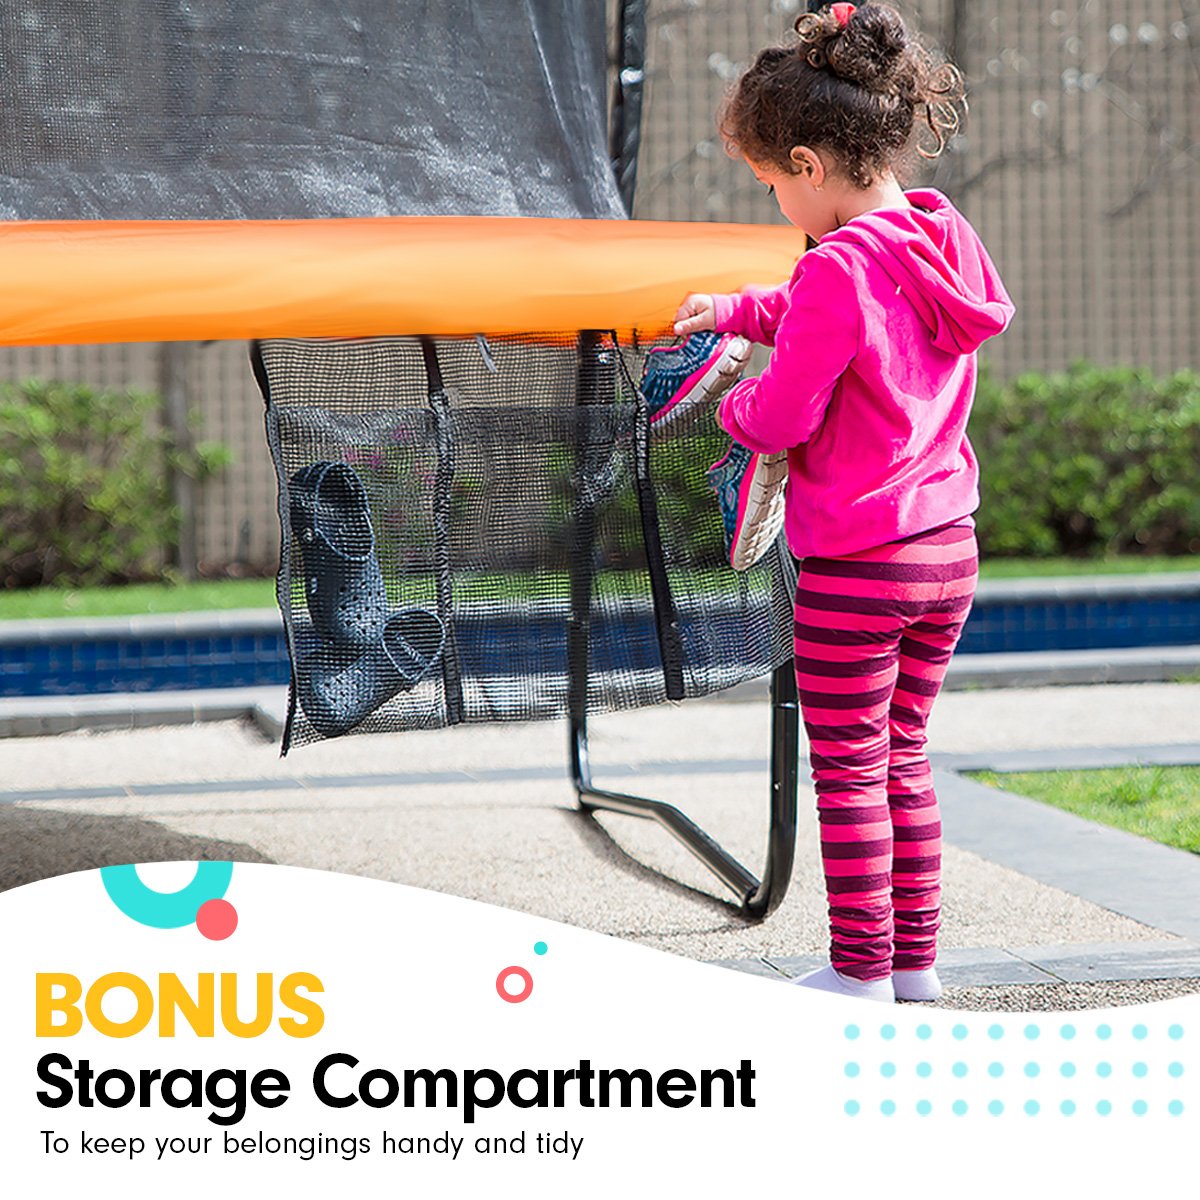 Kahuna 8ft Outdoor Orange Trampoline For Kids And Children Suited For Fitness Exercise Gymnastics With Safety Enclosure Basketball Hoop Set